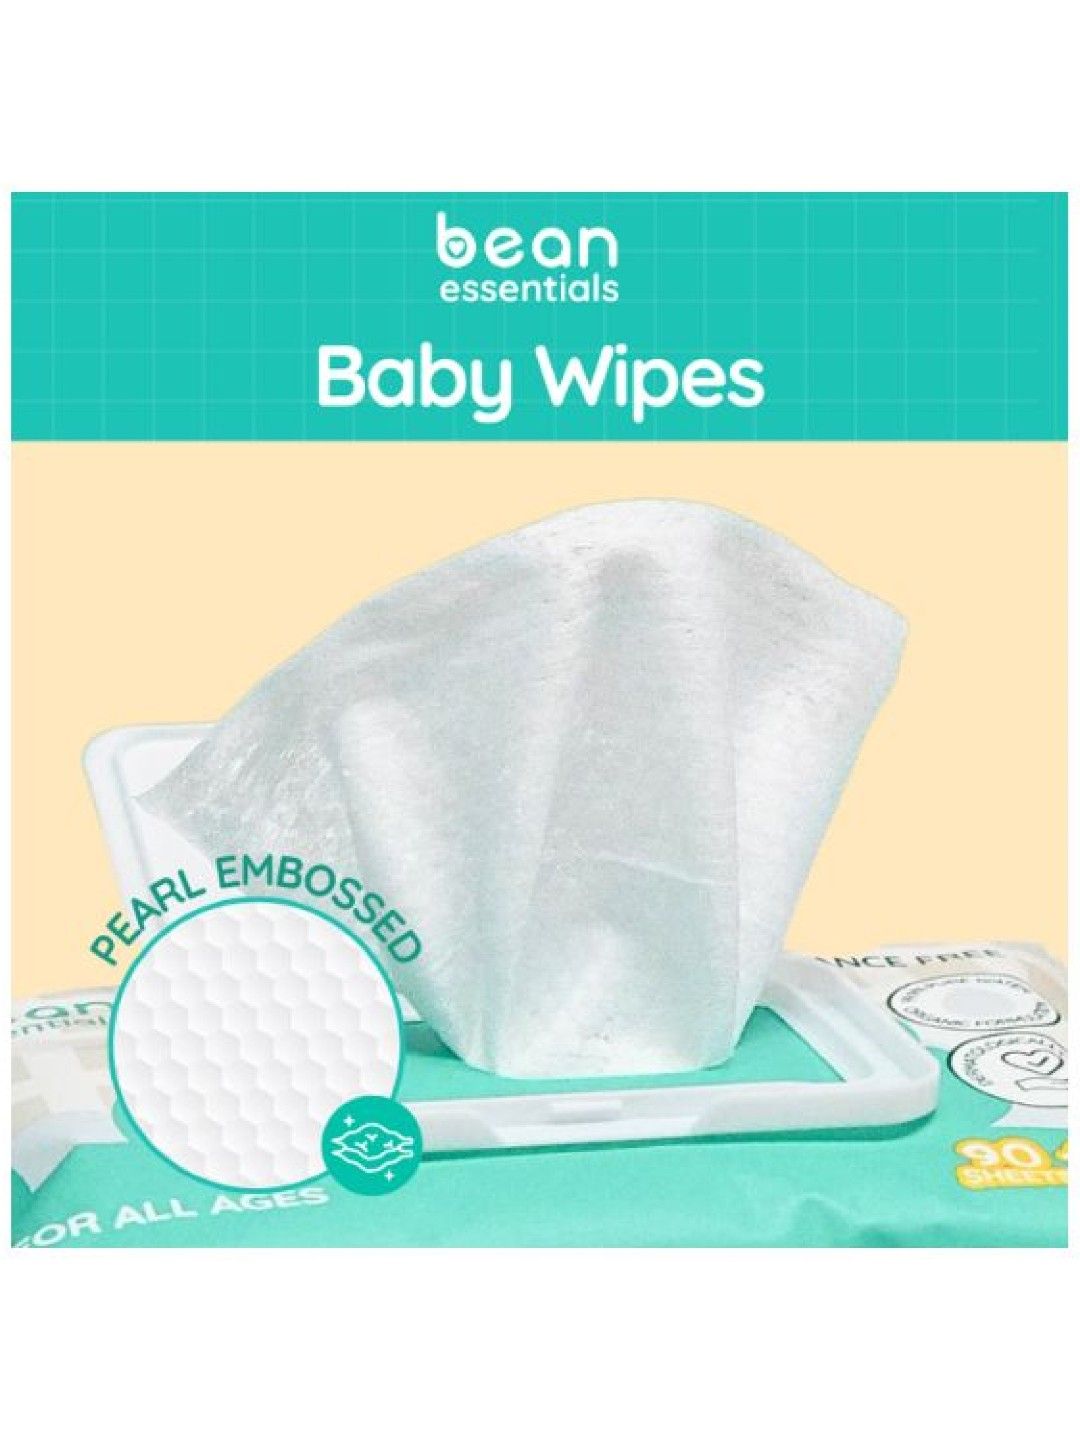 bean essentials Baby Wipes Fragrance Free 100 sheets (No Color- Image 4)